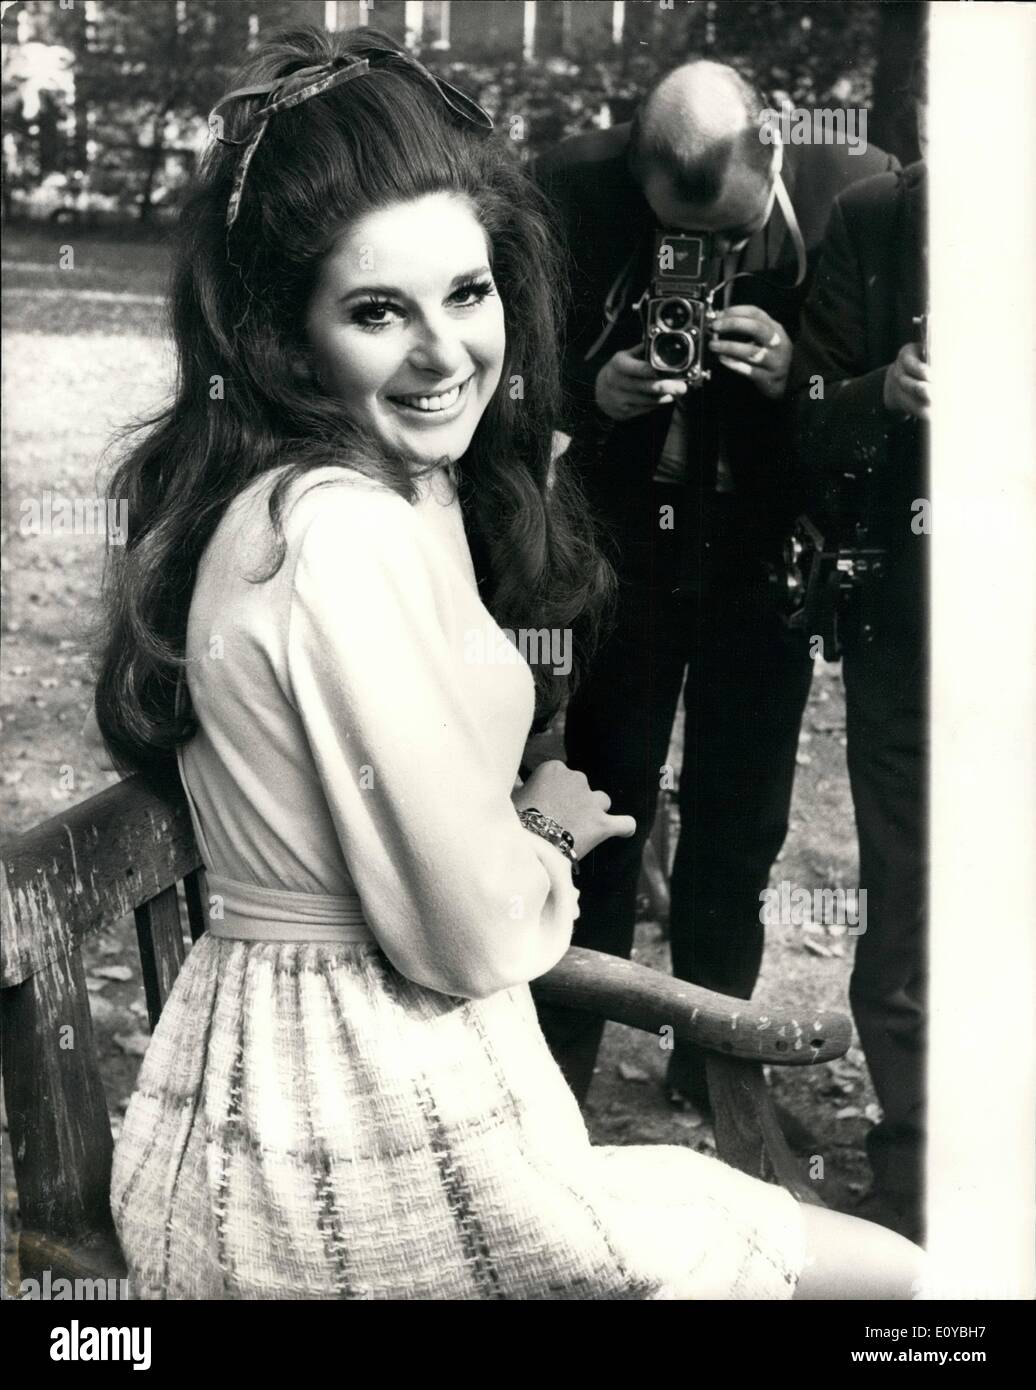 Oct. 10, 1969 - Bobbie Gentry arrives in London; American singing star Bobbie Gentry, who has hit the No.1 spot in the British charts with her recording ''I'll never fall in love again'', has arrived in London for TV and radio appearances, 24 year old Bobbie shot to fame in 1967 when she recorded ''Ode to Billie Joe'', in four weeks from release date the record had sold over 1 million copies. Photo Shows Bobbie Gentry pictured in Manchester Square, London, today. Stock Photo